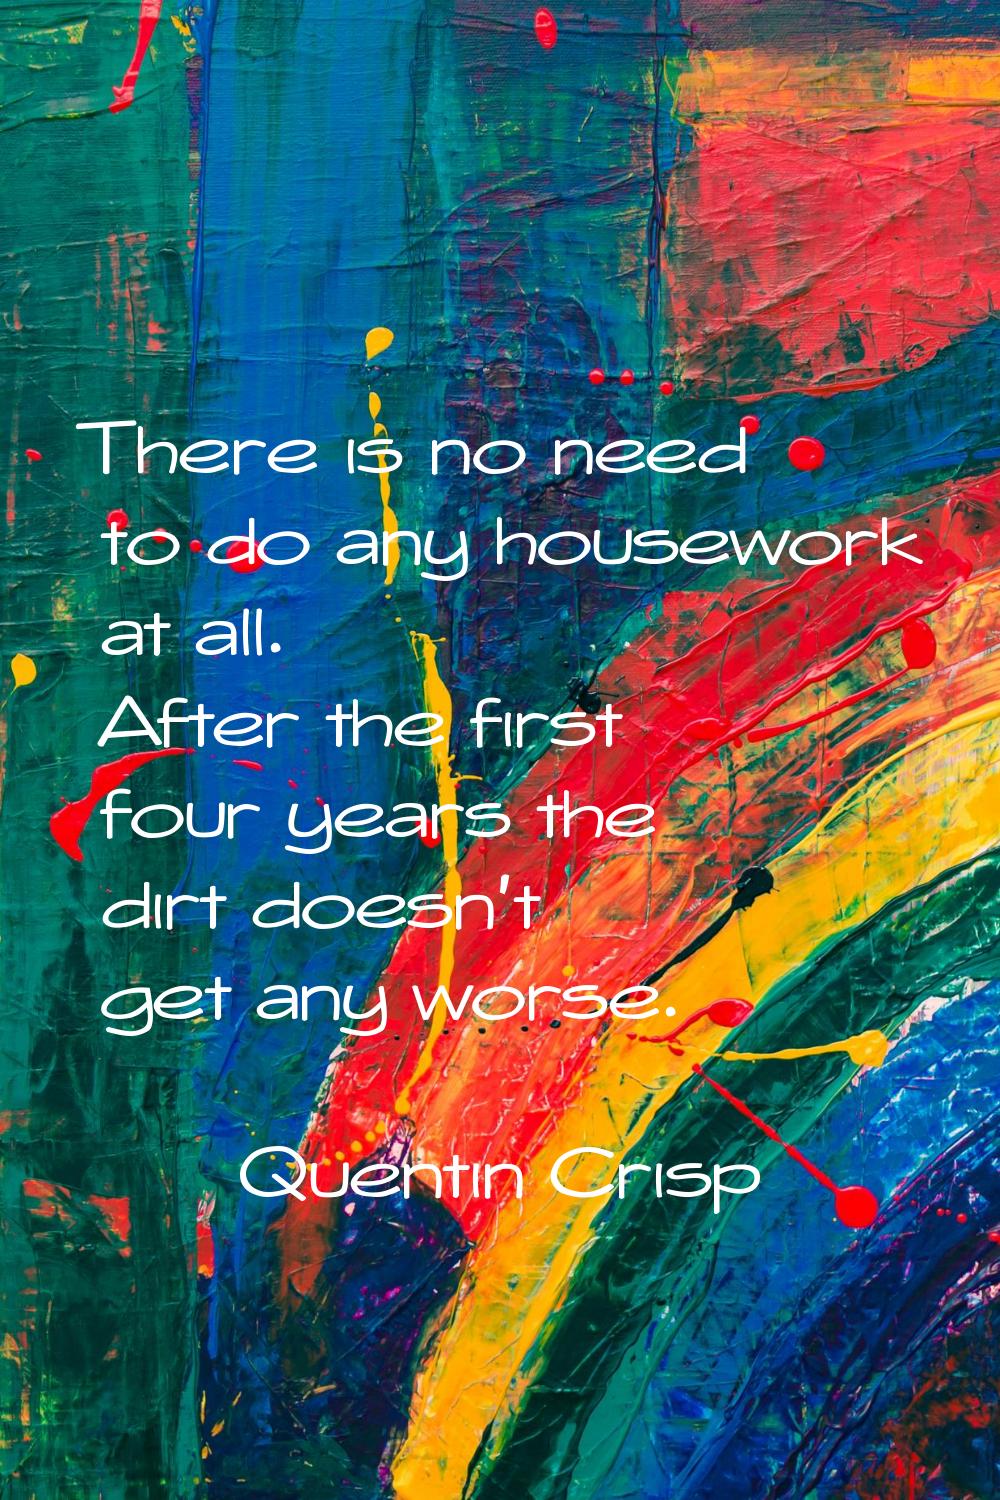 There is no need to do any housework at all. After the first four years the dirt doesn't get any wo